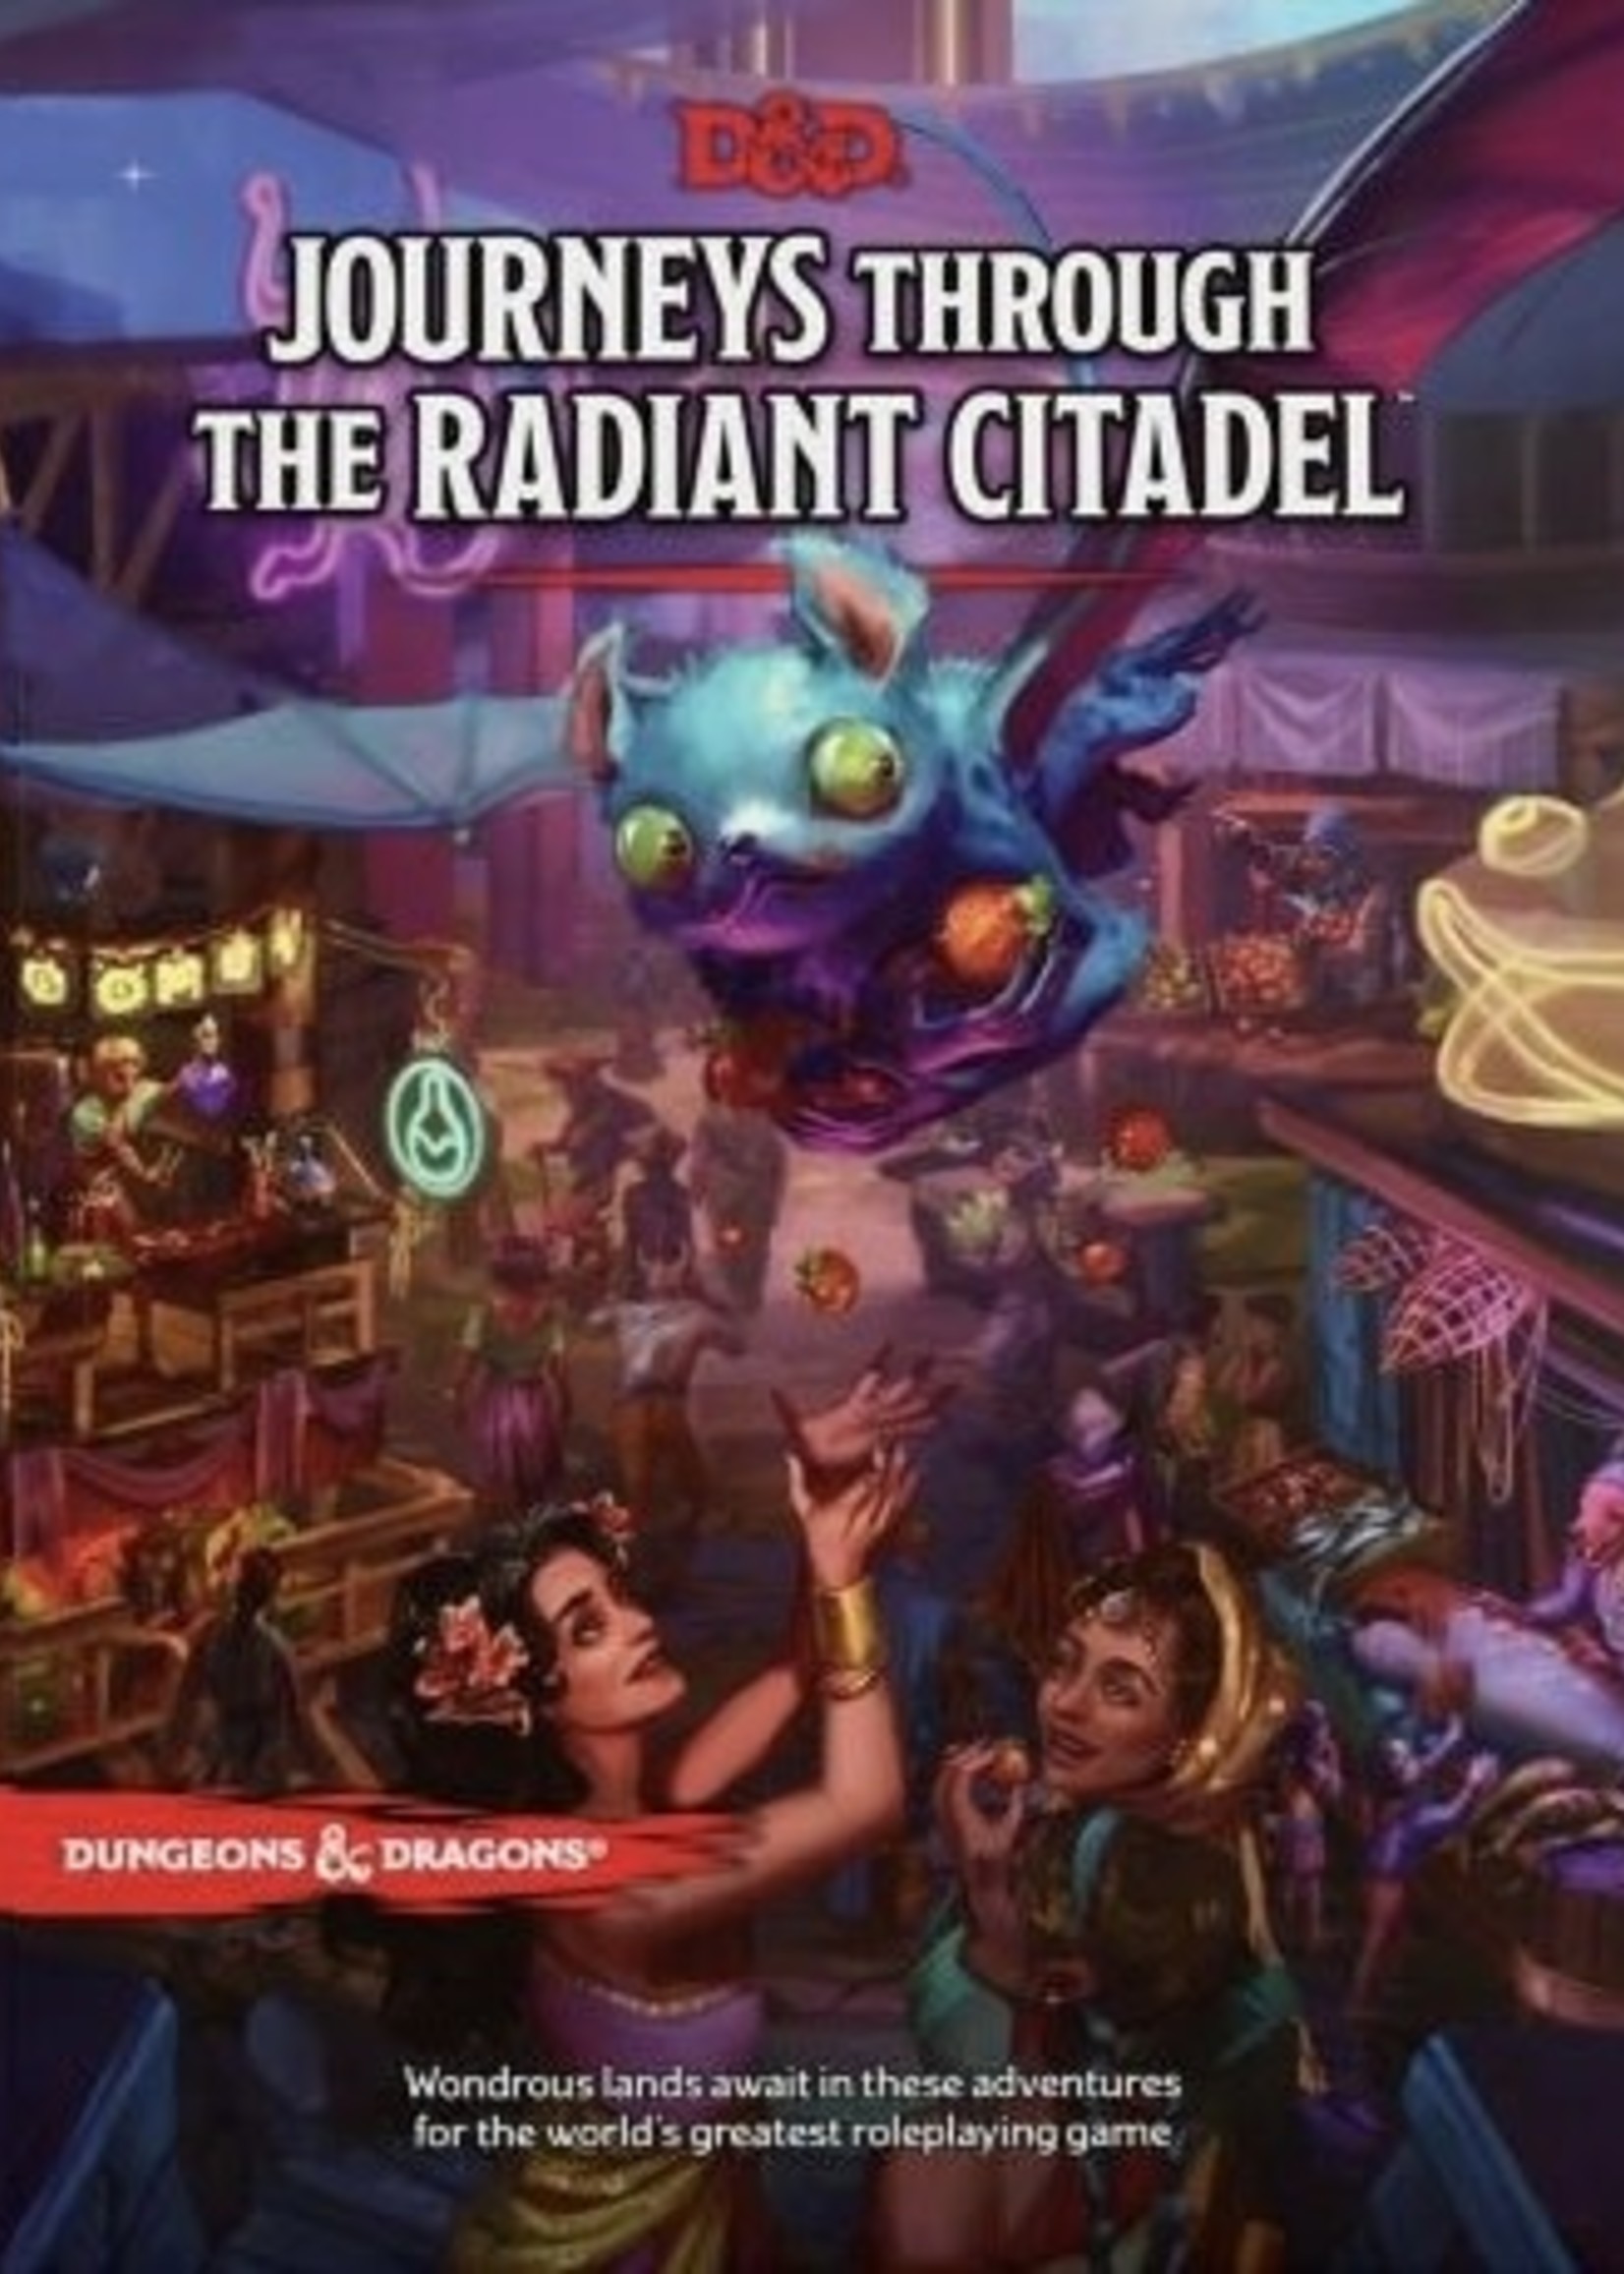 Wizards of the Coast Journeys through the Radiant Citadel